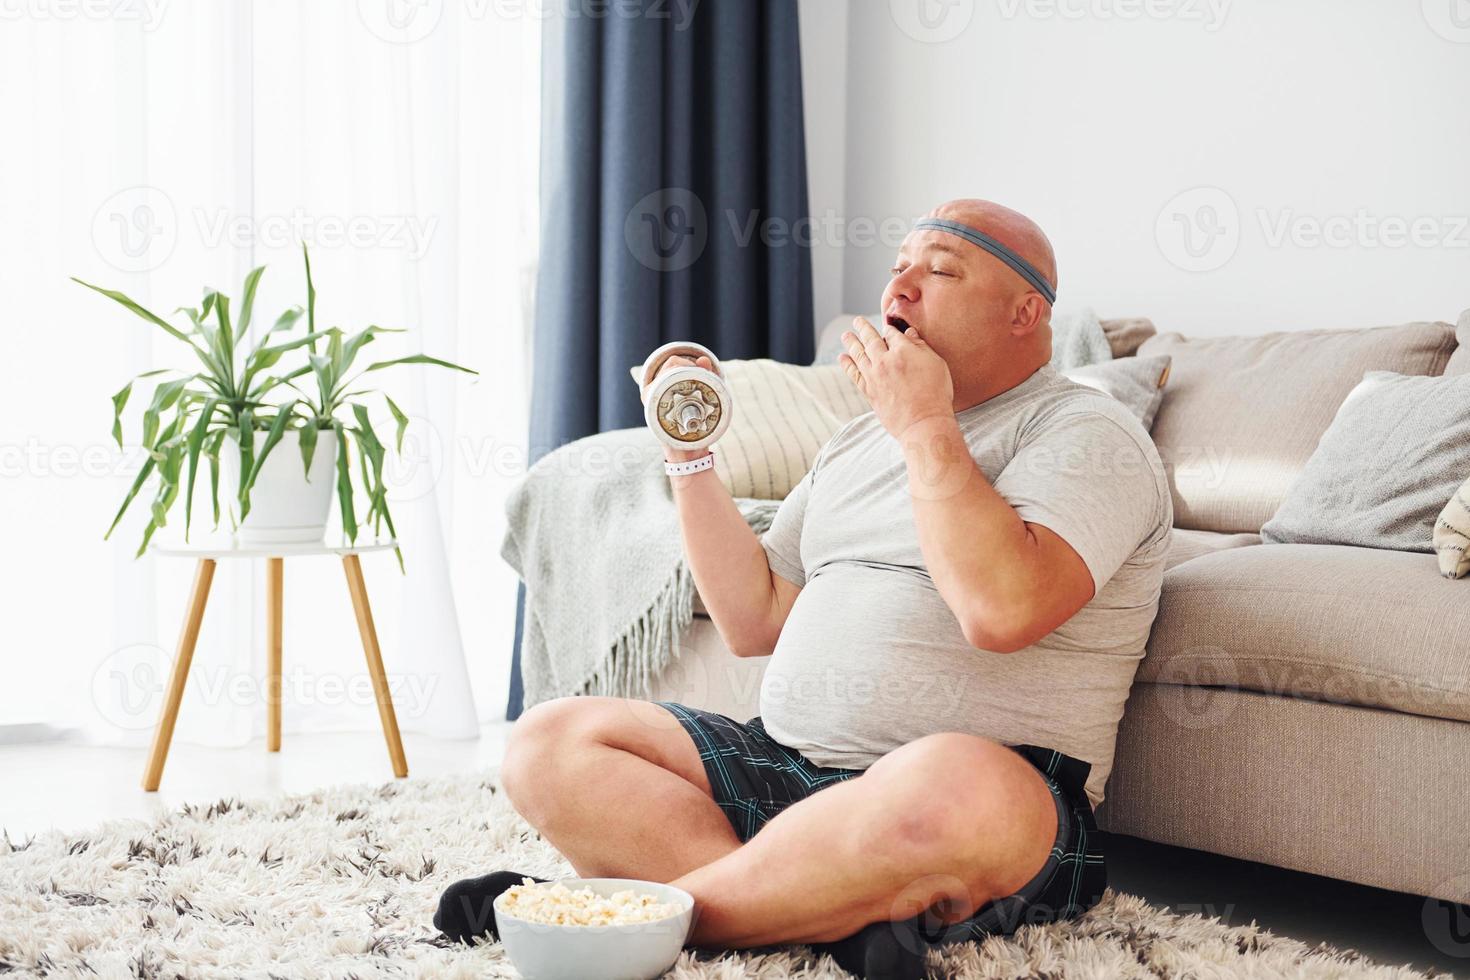 Eats and does exercises. Funny overweight man in casual clothes is indoors at home photo